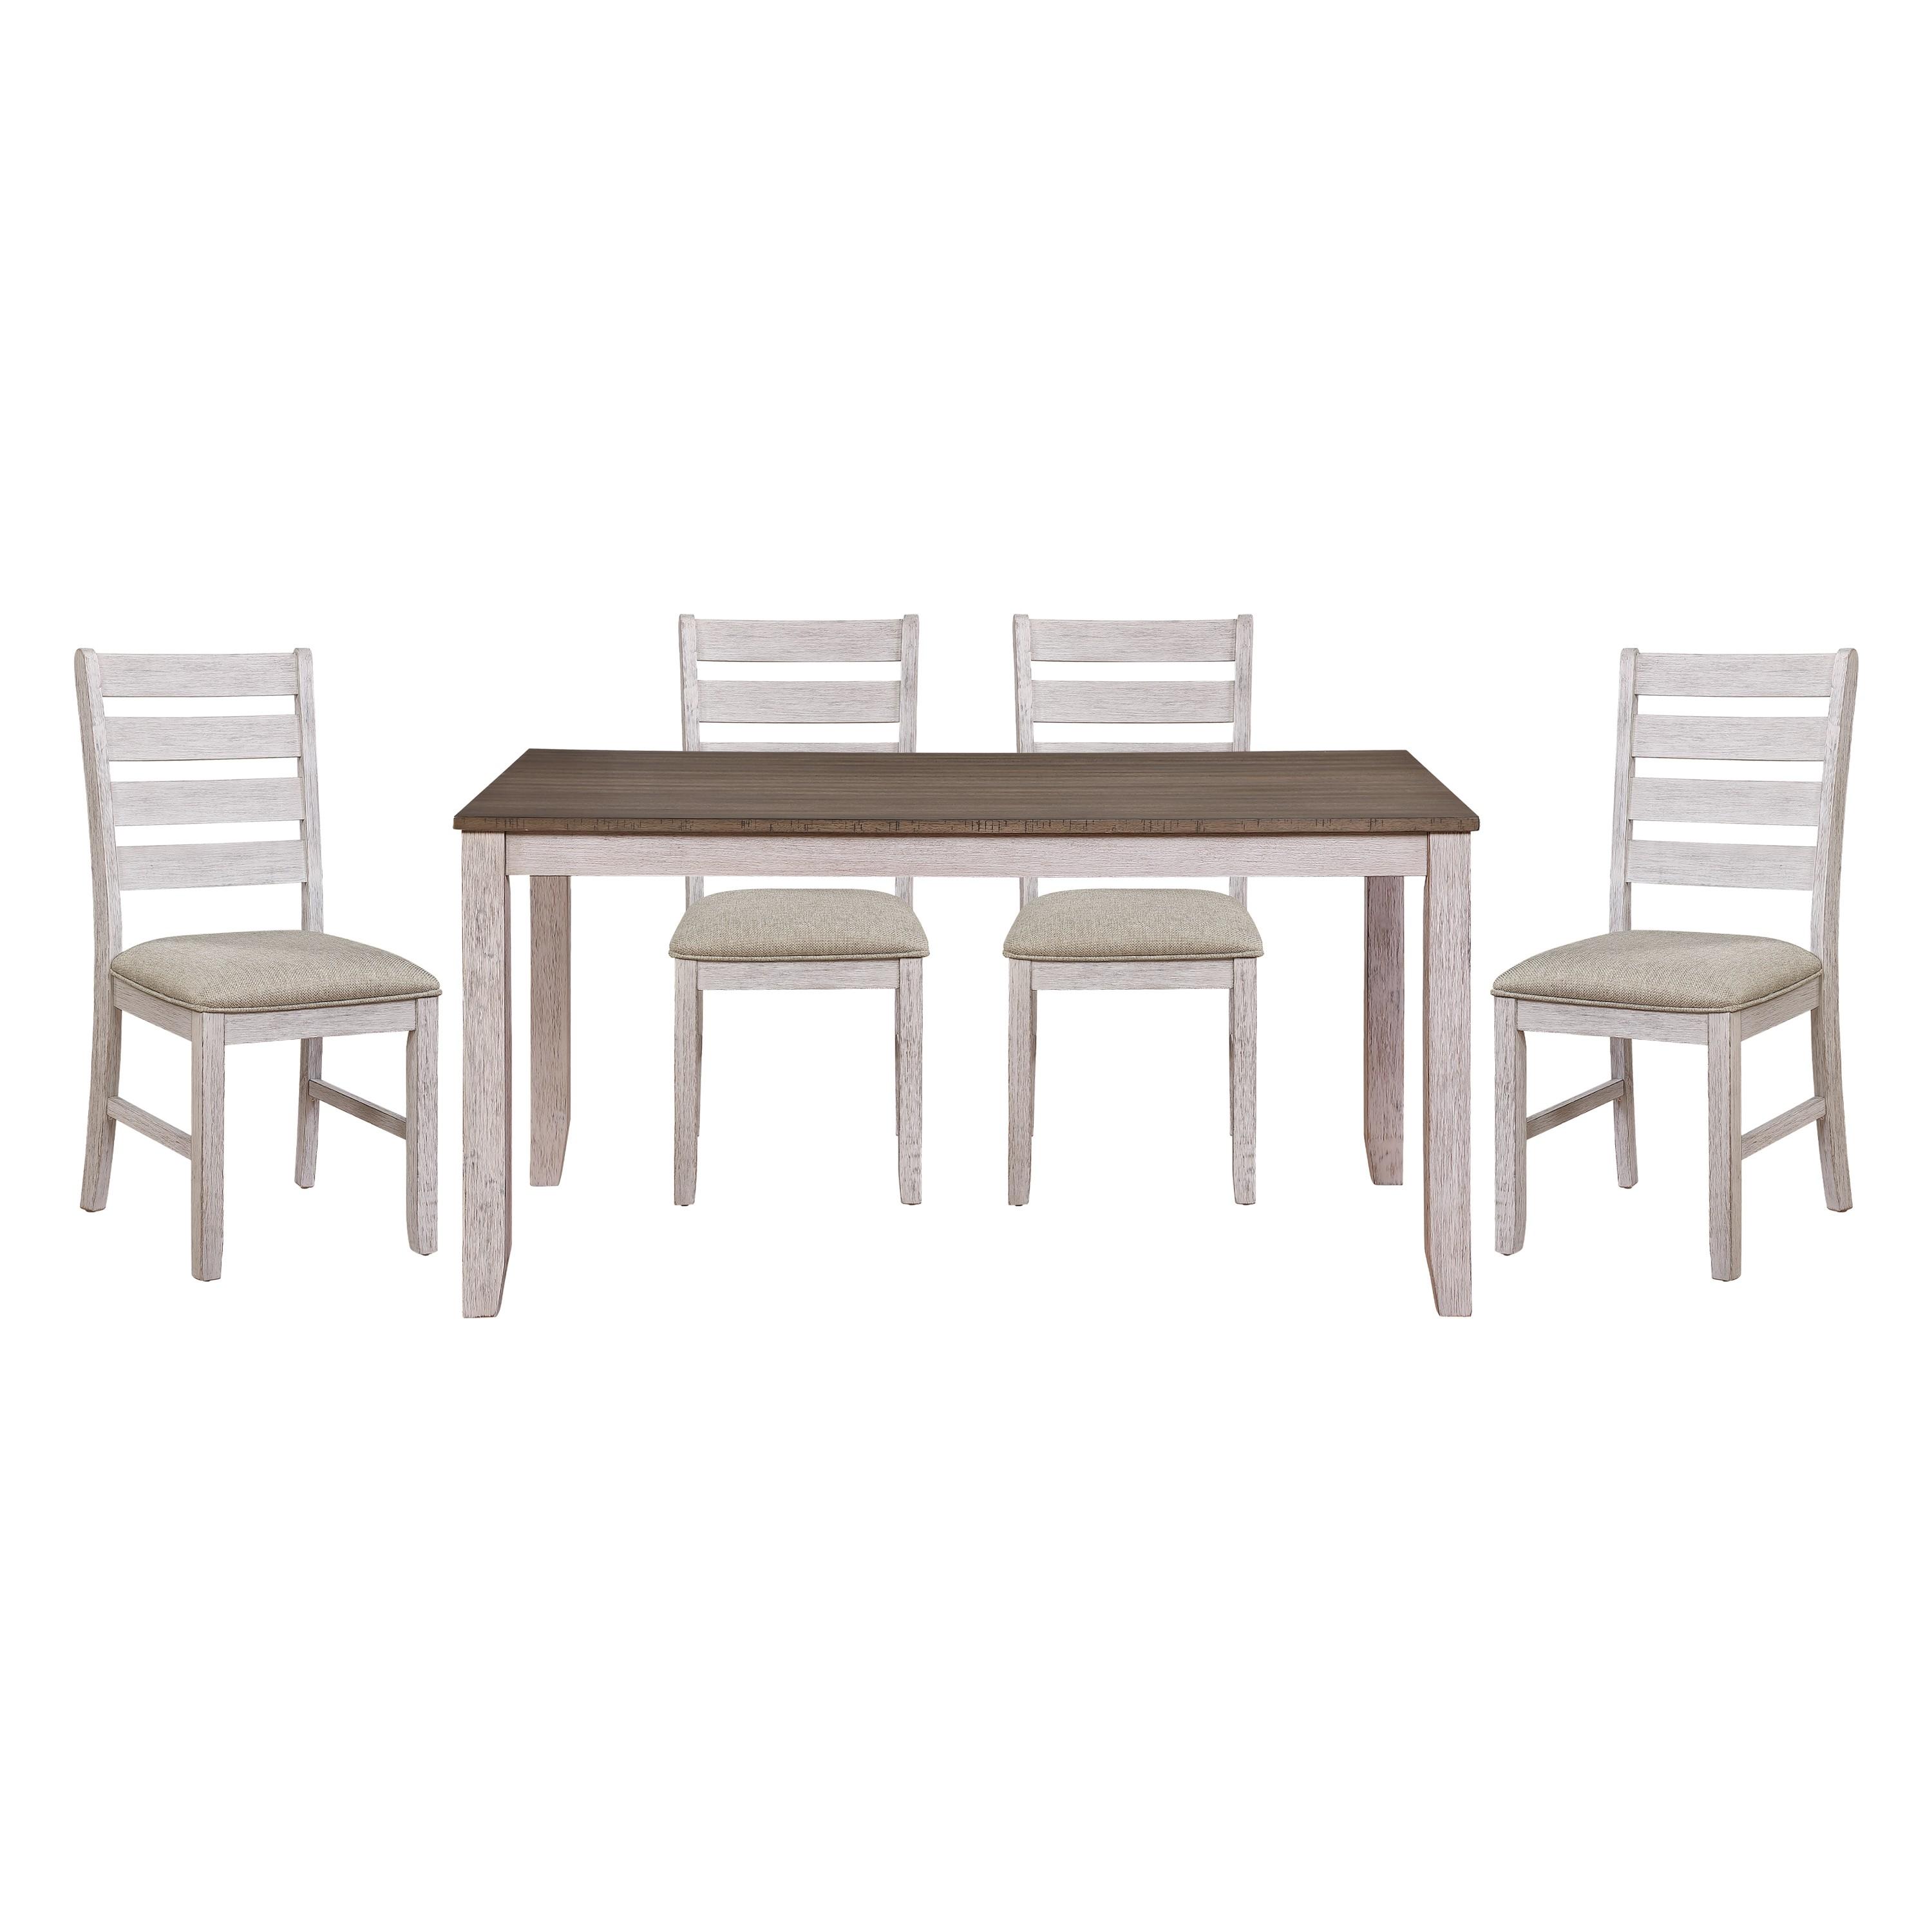 Transitional Dining Room Set 5769W-60*5PC Ithaca 5769W-60*5PC in White, Brown Polyester